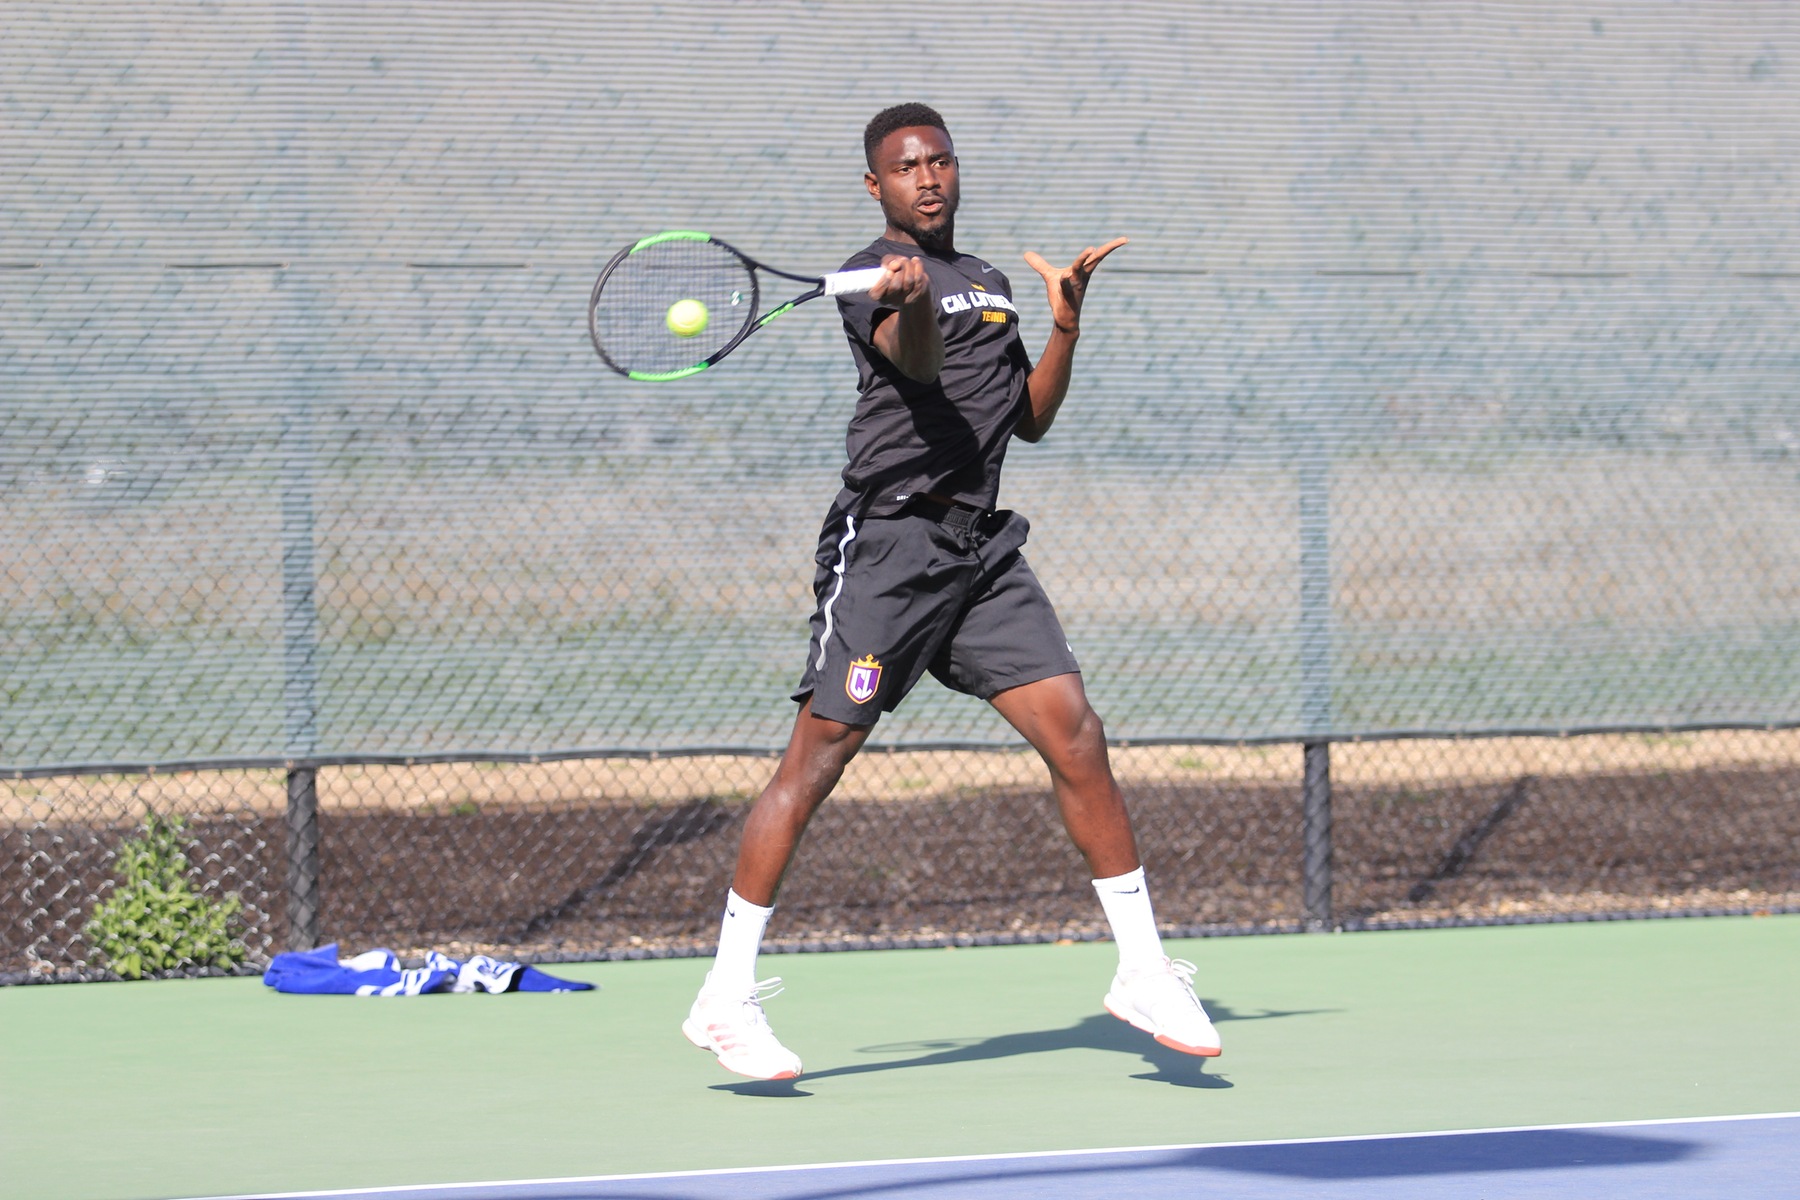 Darvel Lossangoye began his Cal Lutheran tennis career with a singles win. (Photo Credit: Gabby Flores)